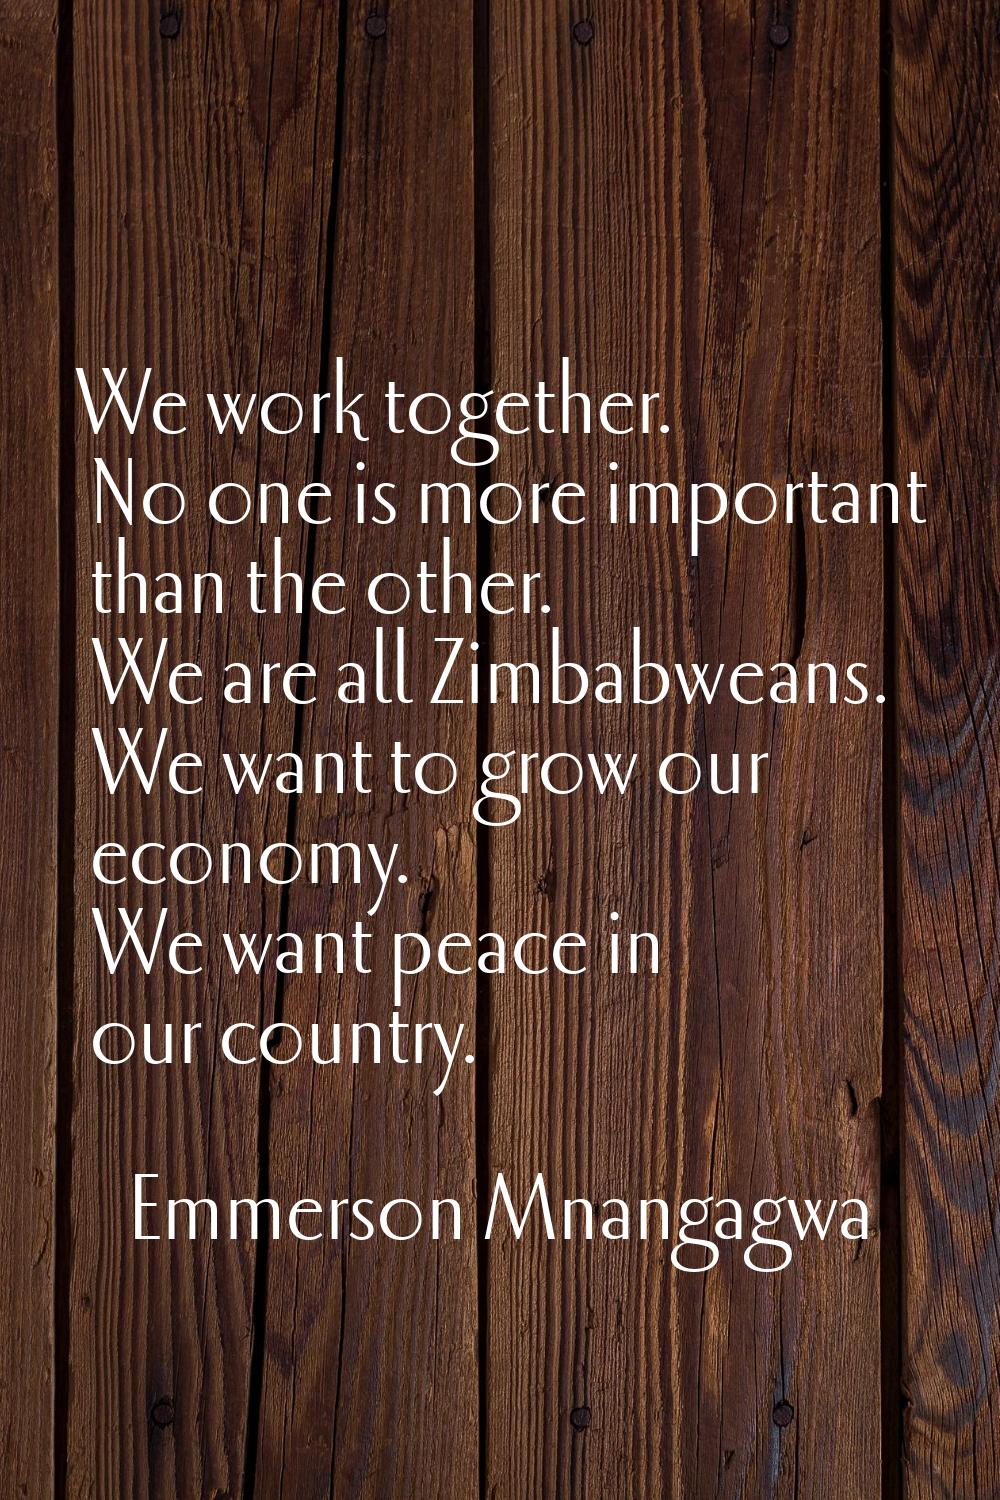 We work together. No one is more important than the other. We are all Zimbabweans. We want to grow 